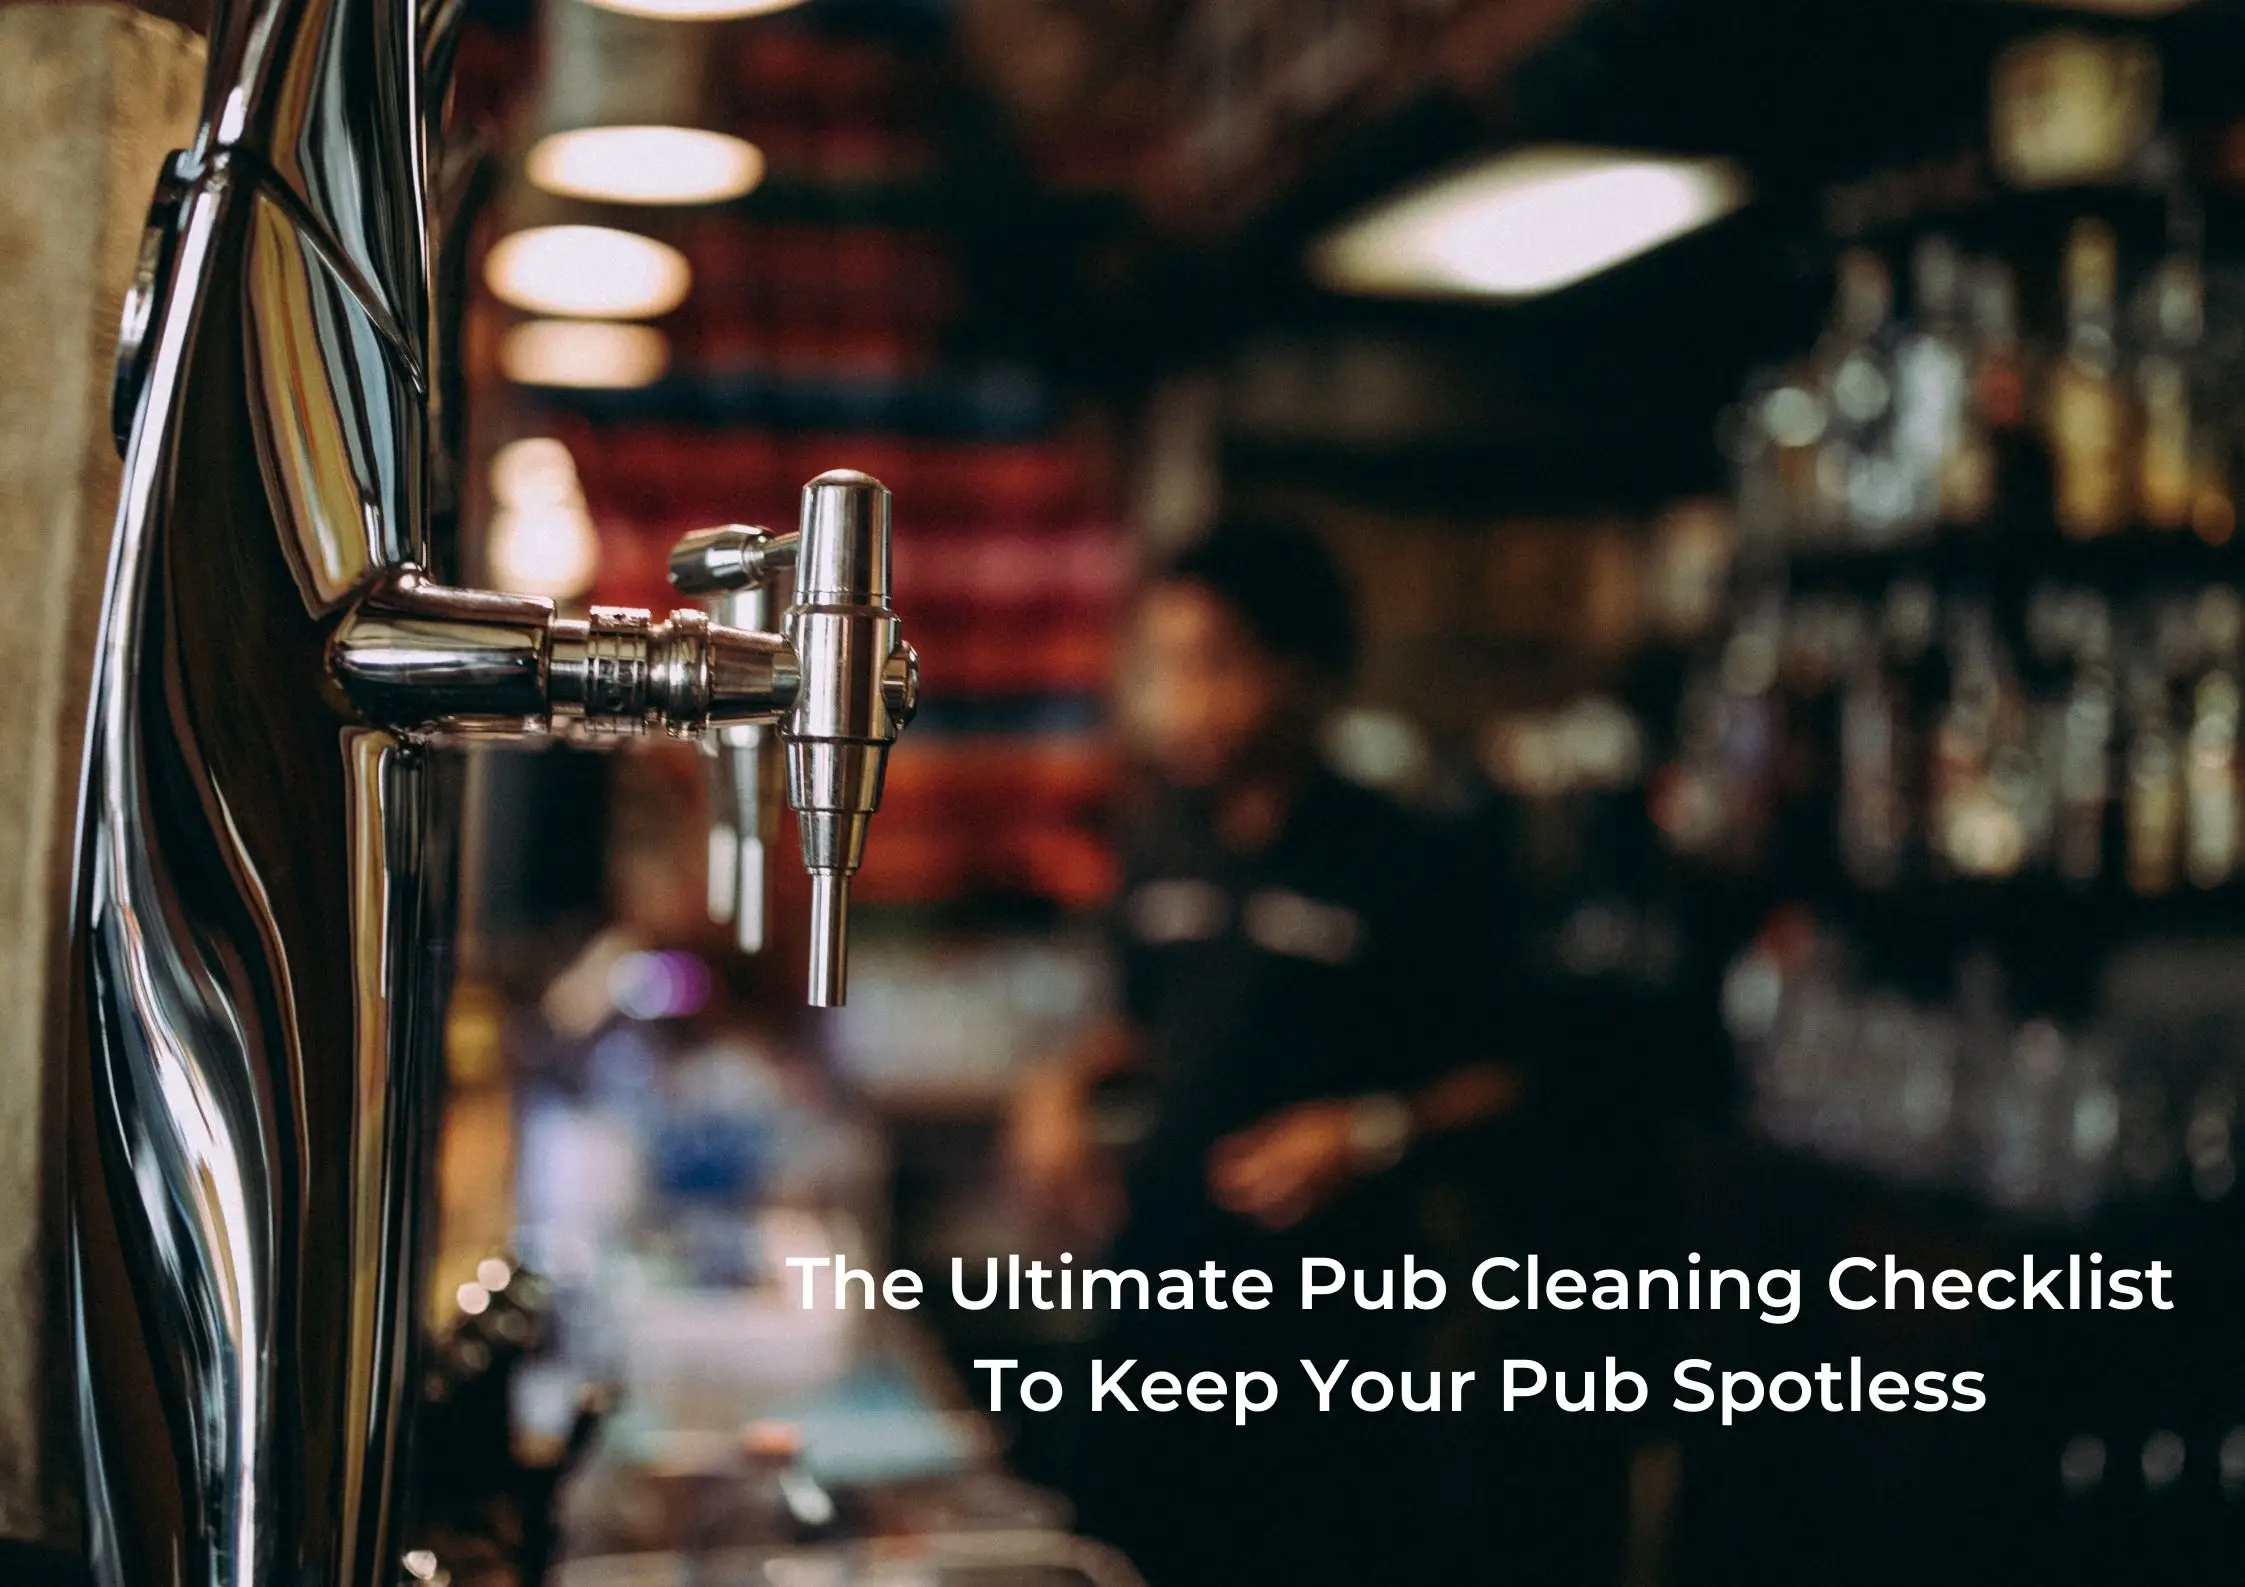 The Ultimate Pub Cleaning Checklist To Keep Your Pub Spotless 1